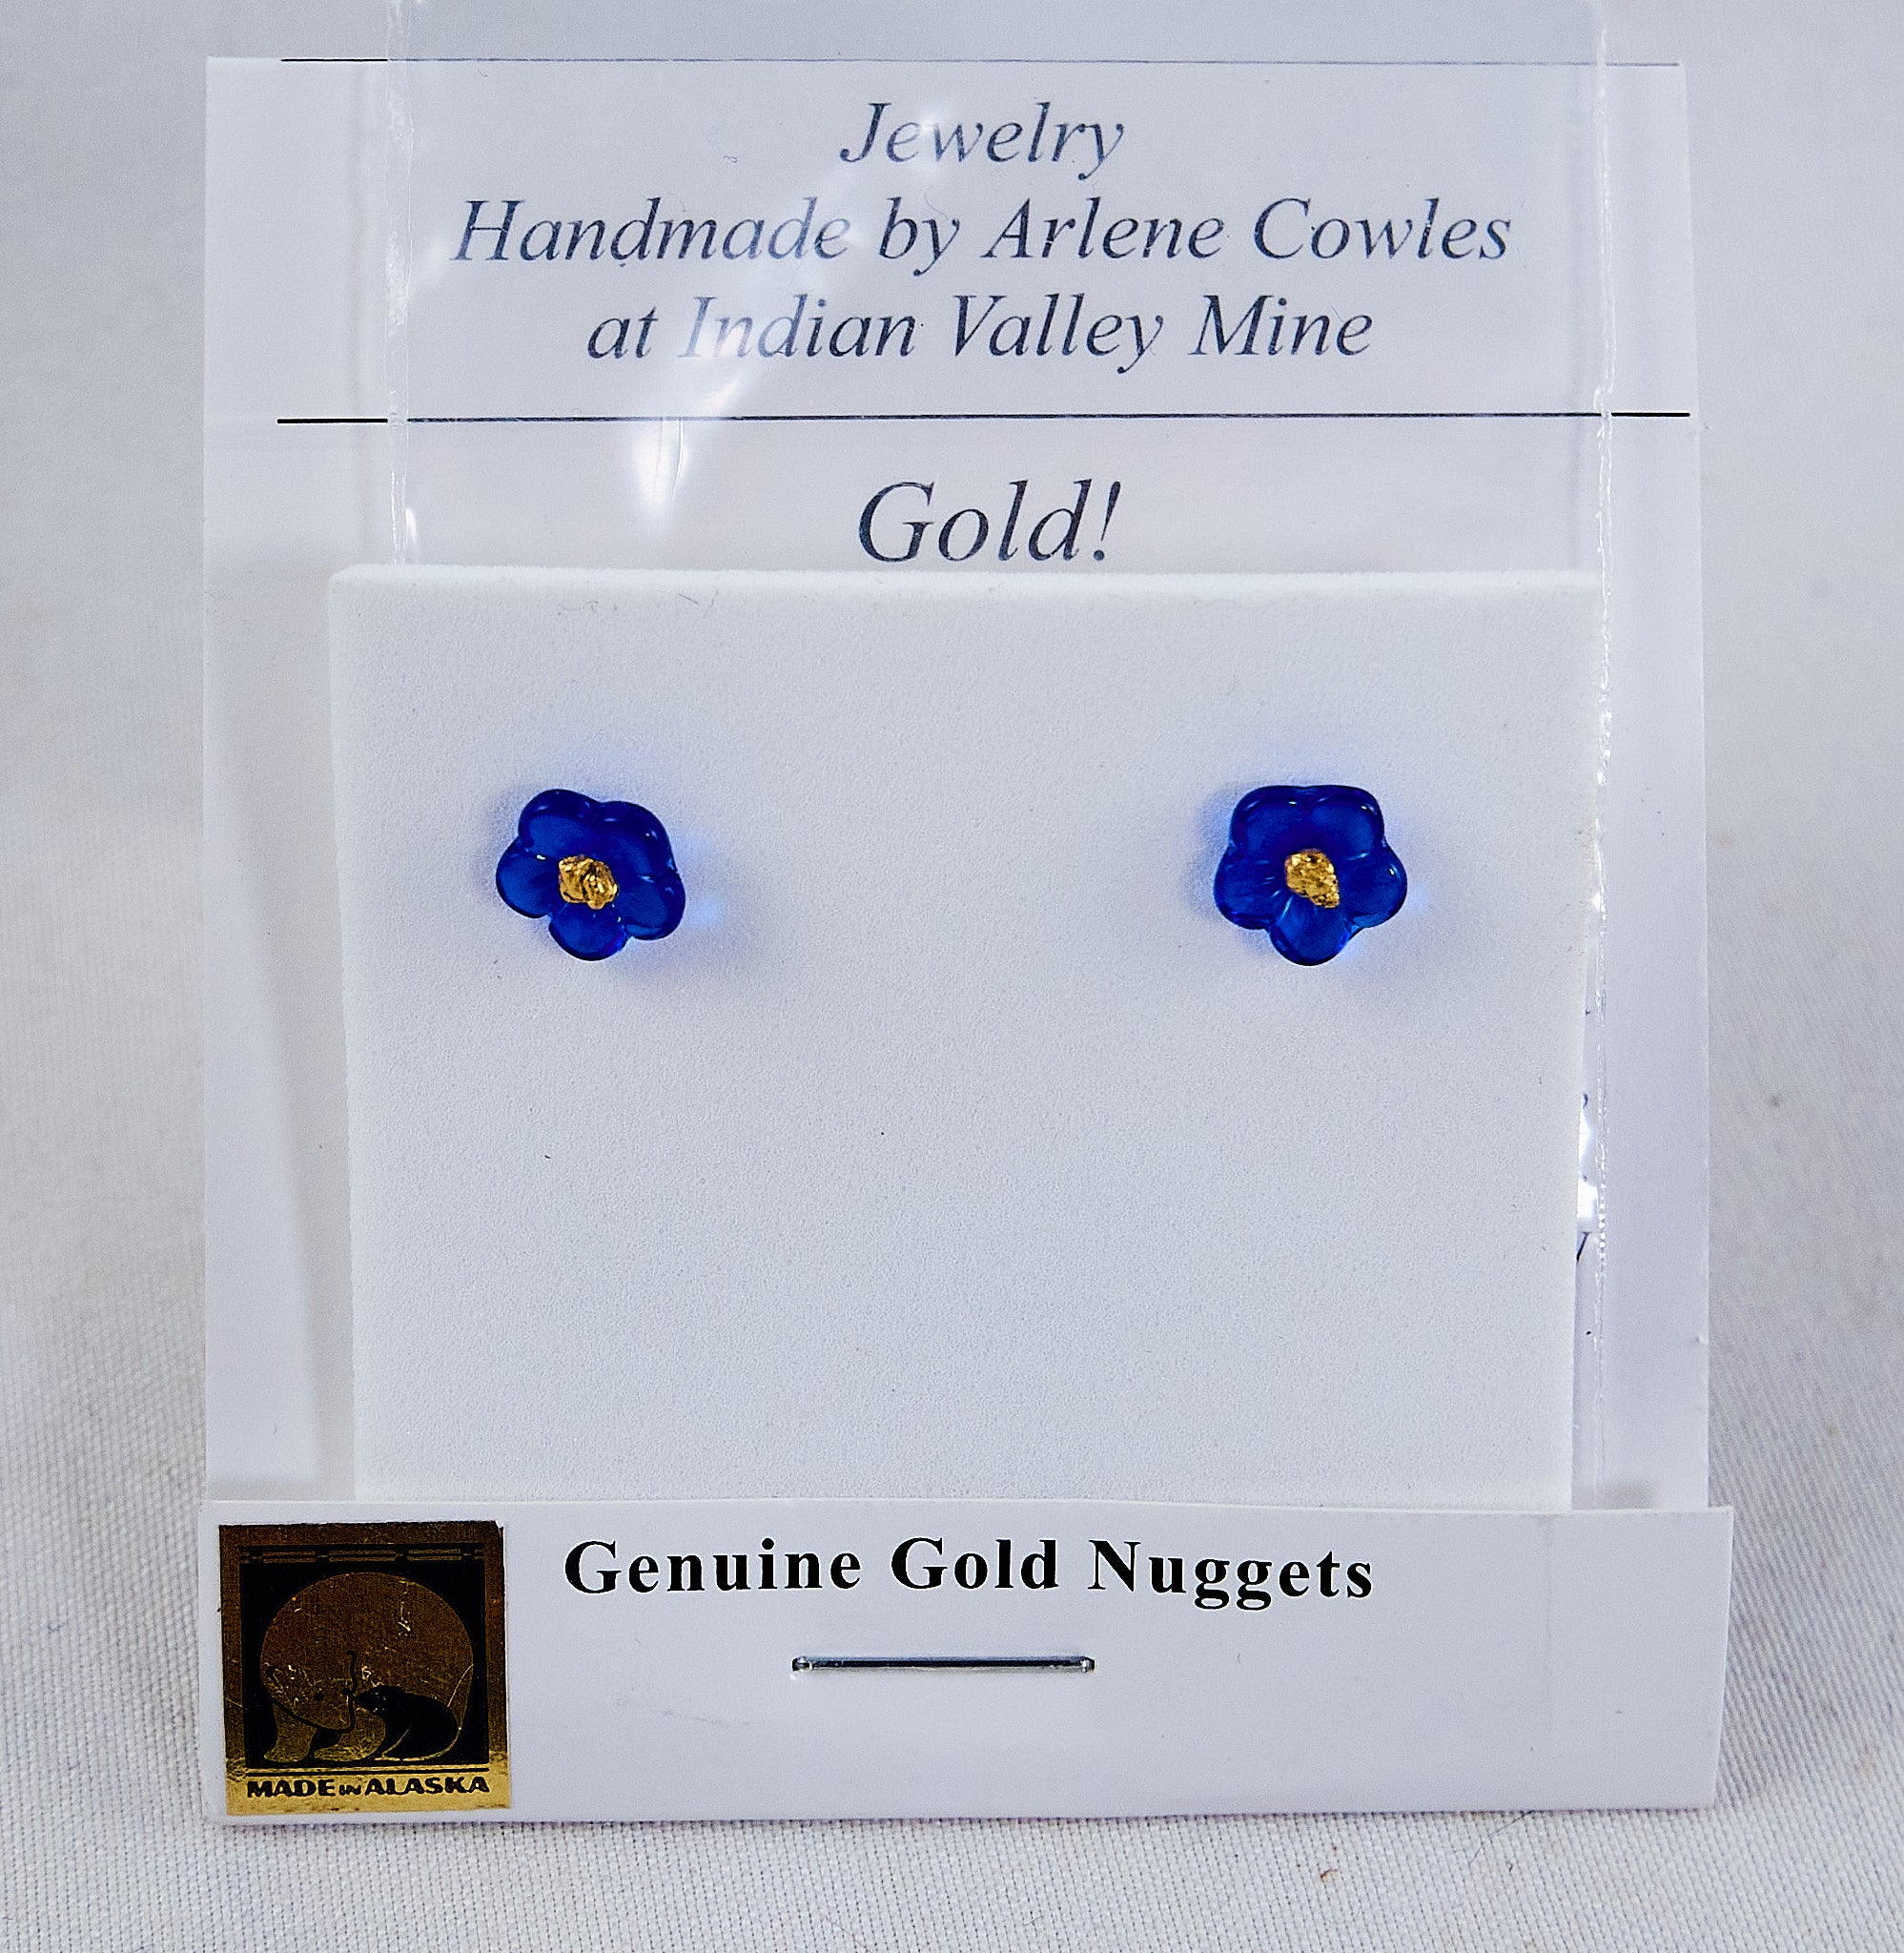 Forget-Me-Not with Gold Nugget Studded Earrings